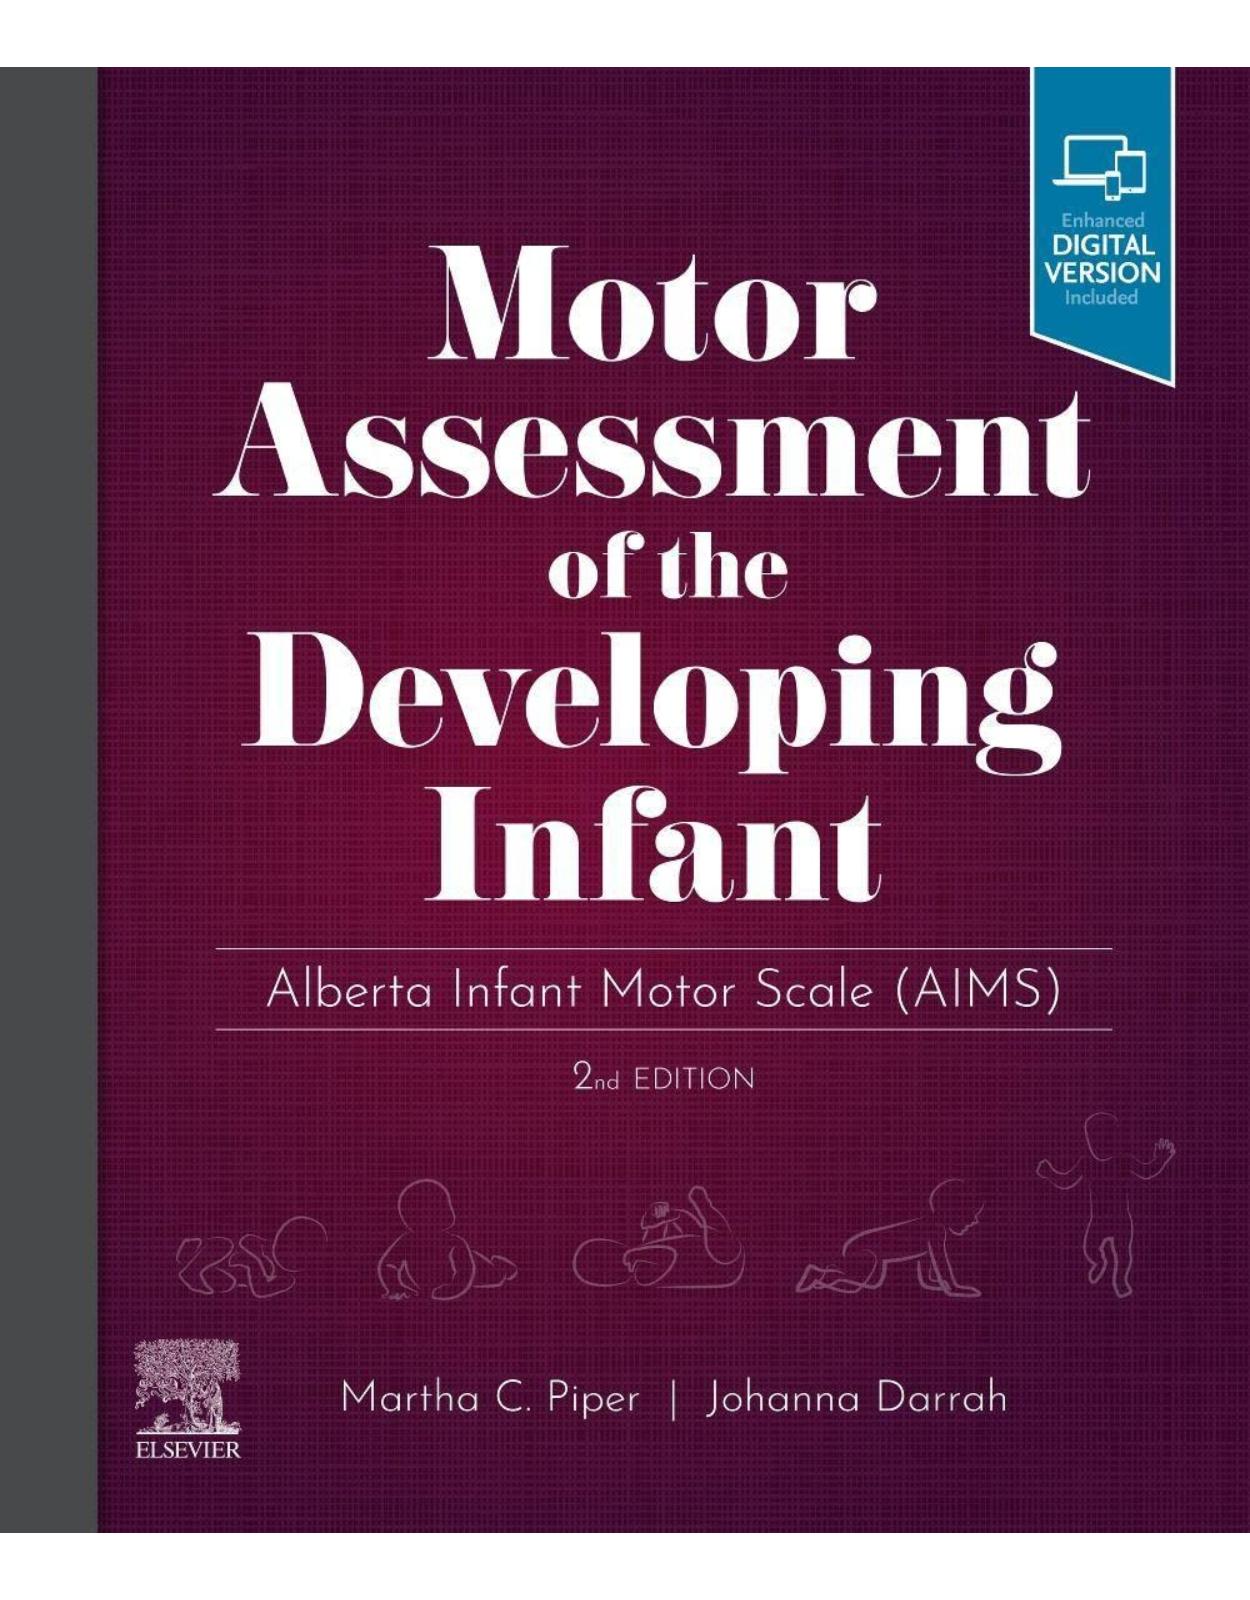 Motor Assessment of the Developing Infant: Alberta Infant Motor Scale (AIMS)